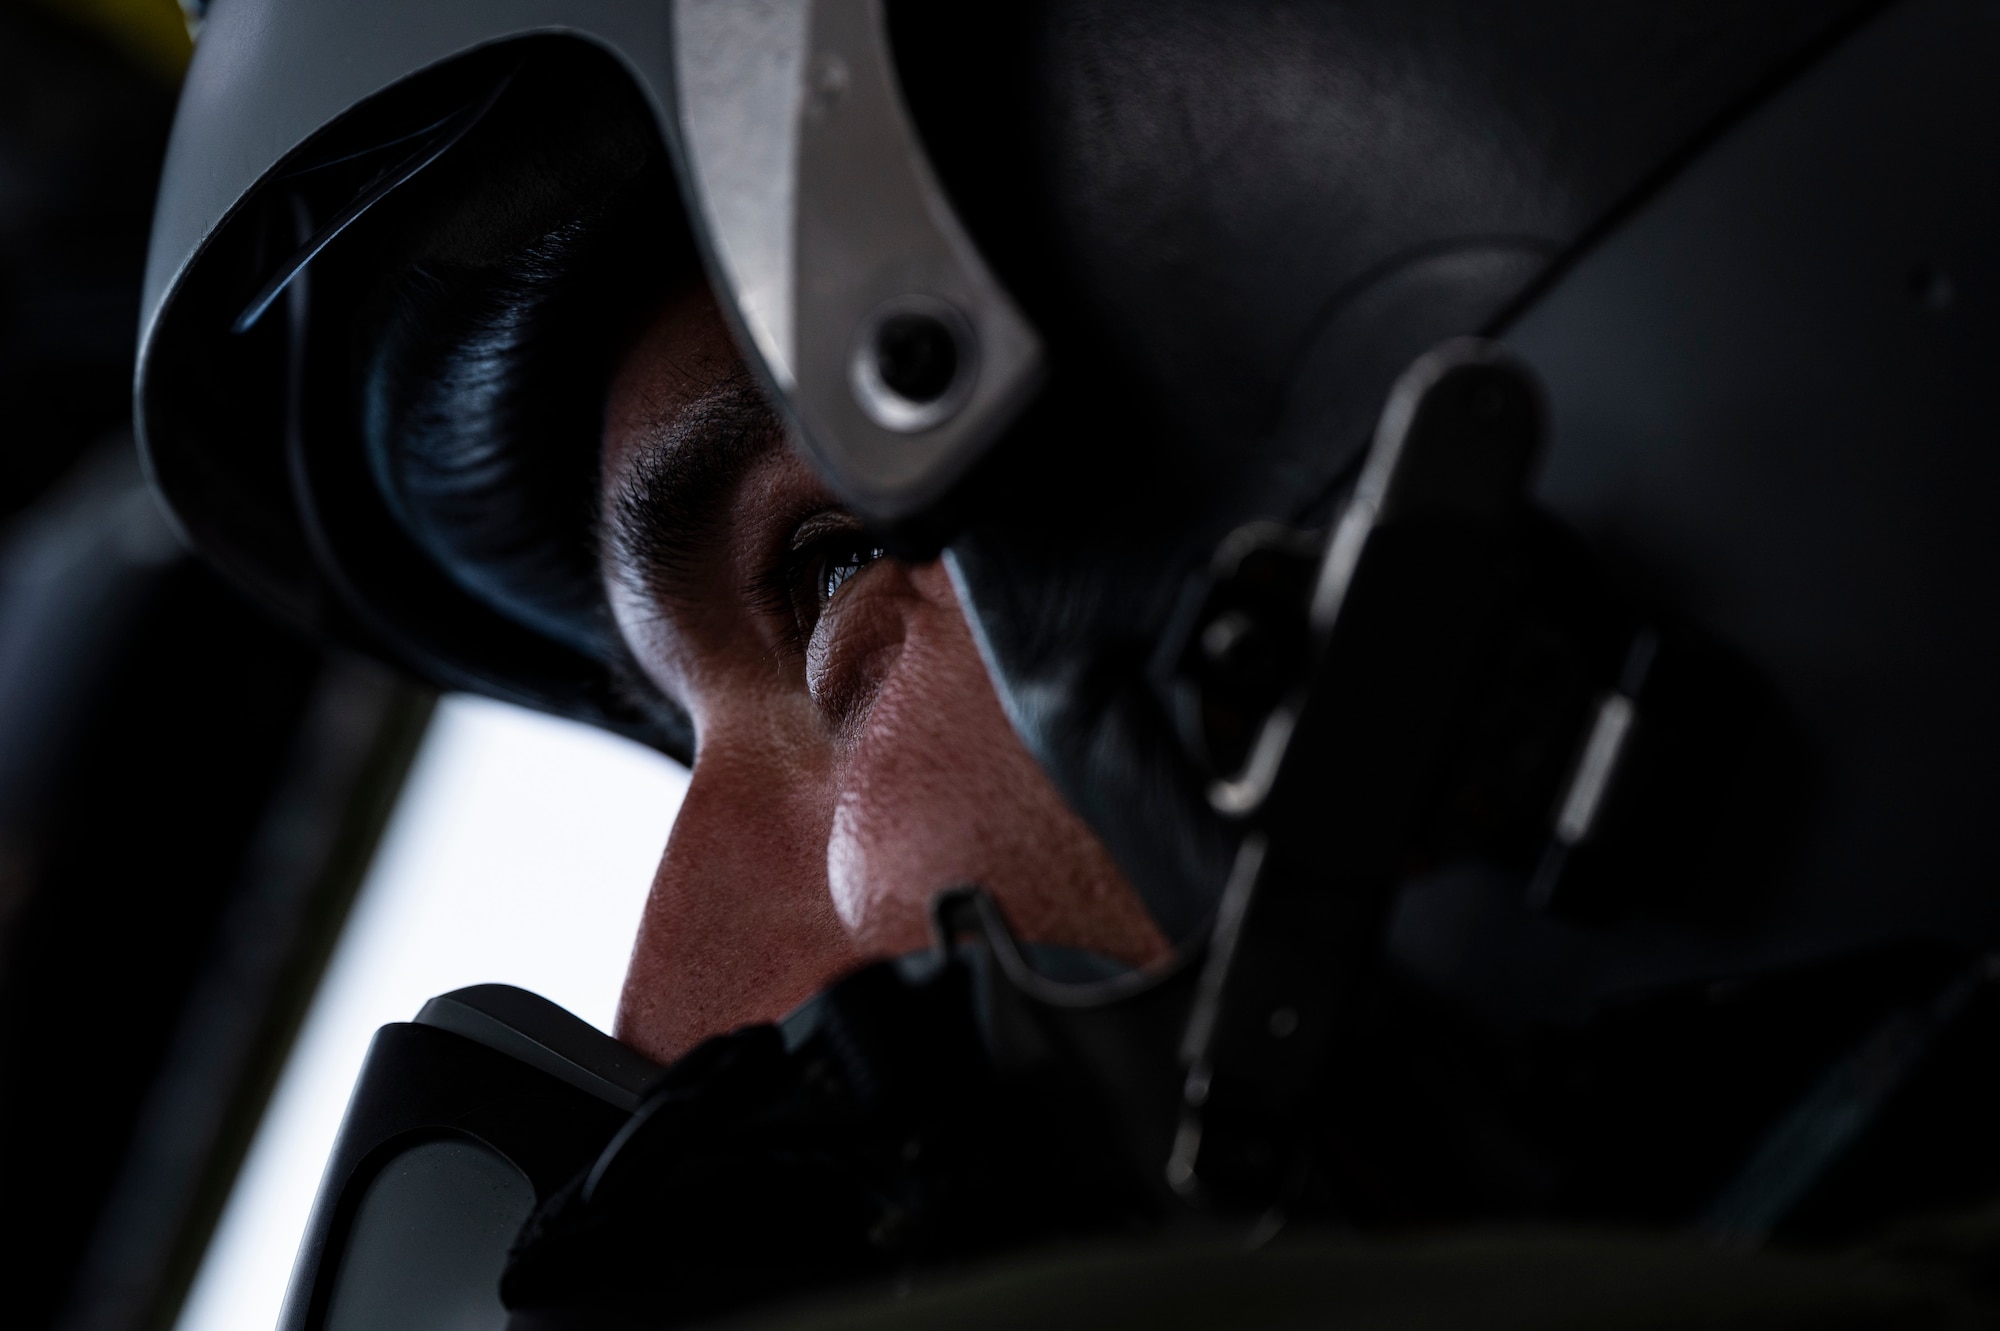 A U.S. Air Force aircrew member speaks to the pilot on a B-52H Stratofortress, assigned to the 2nd Bomb Wing, Barksdale Air Force Base, Louisiana, over the Indo-Pacific region during a Bomber Task Force mission, Sept. 14, 2021. The U.S. Air Force is engaged, postured, and ready with credible force to assure, deter, and defend in an increasingly complex security environment. (U.S. Air Force photo by Staff Sgt. Devin M. Rumbaugh)